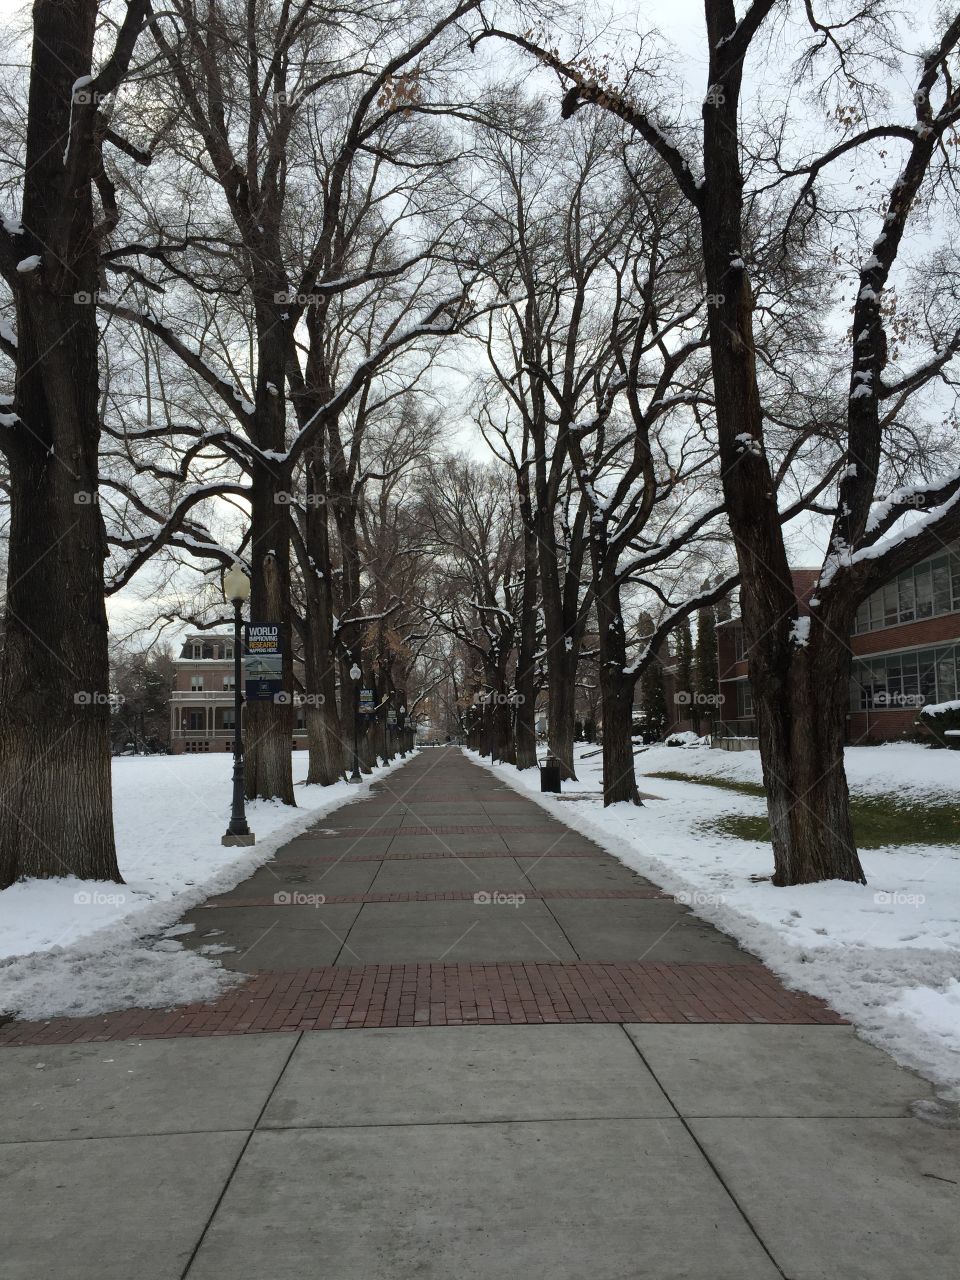 Cold winter day walking on the UNR campus in Reno, NV